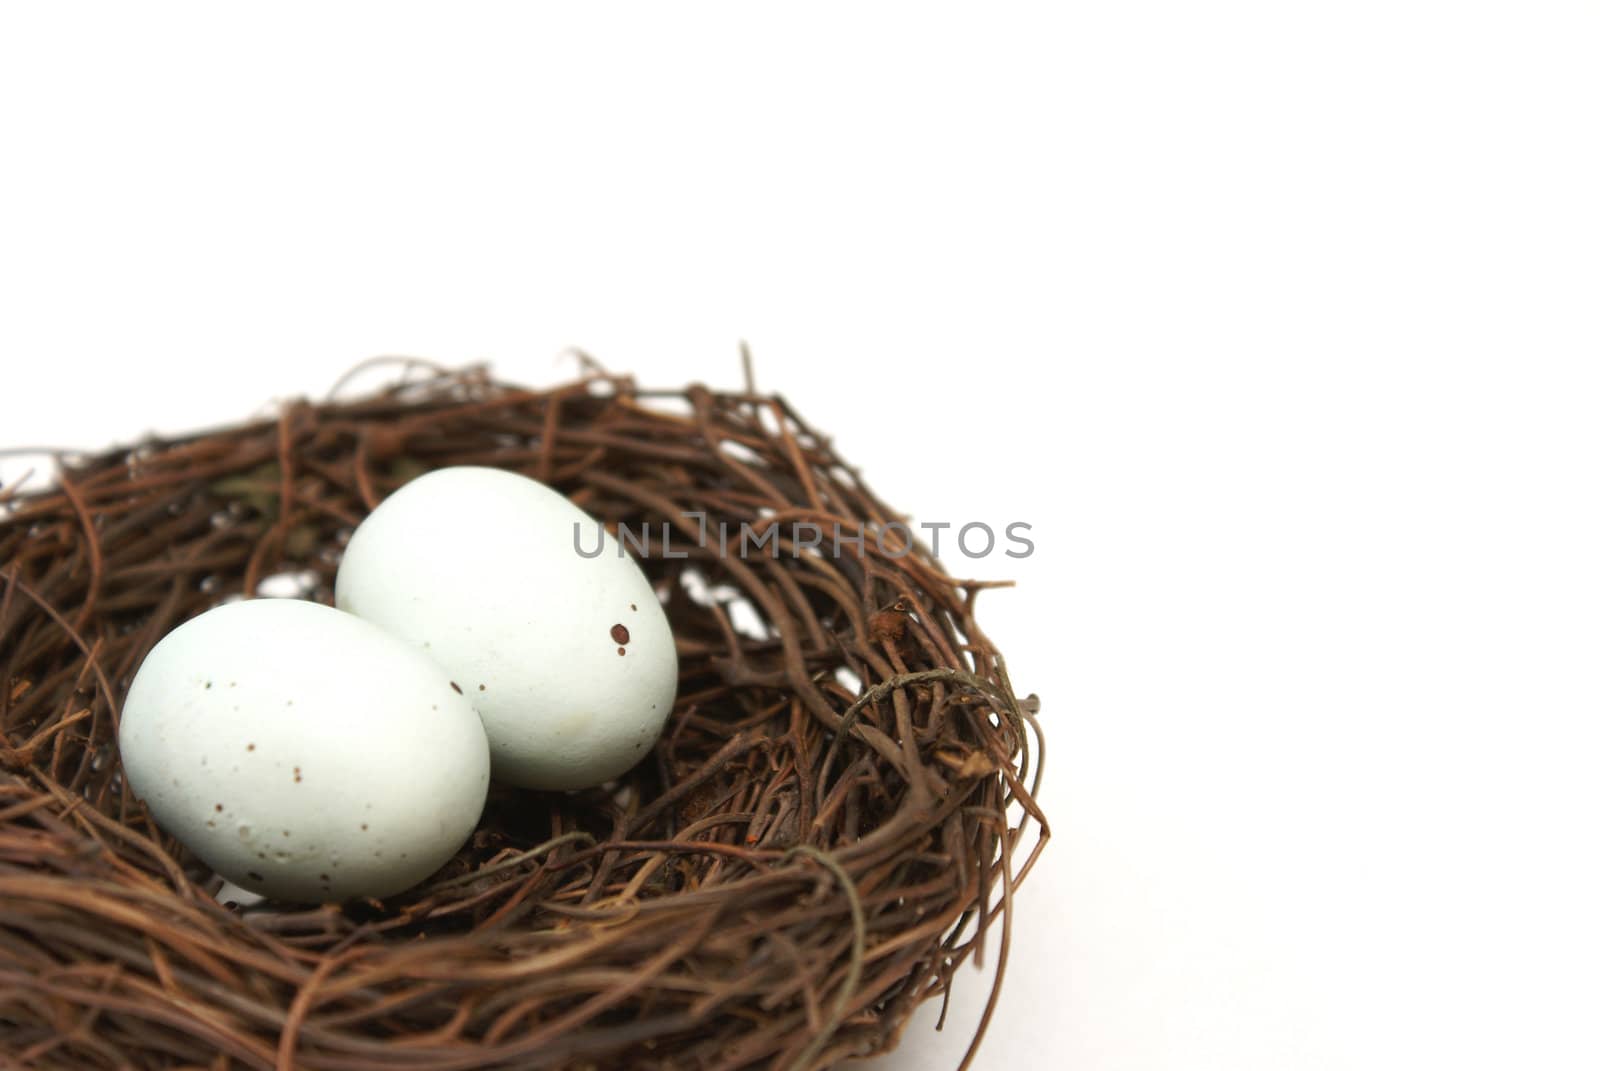 A macro shot of a bird's nest with two eggs over a white background.